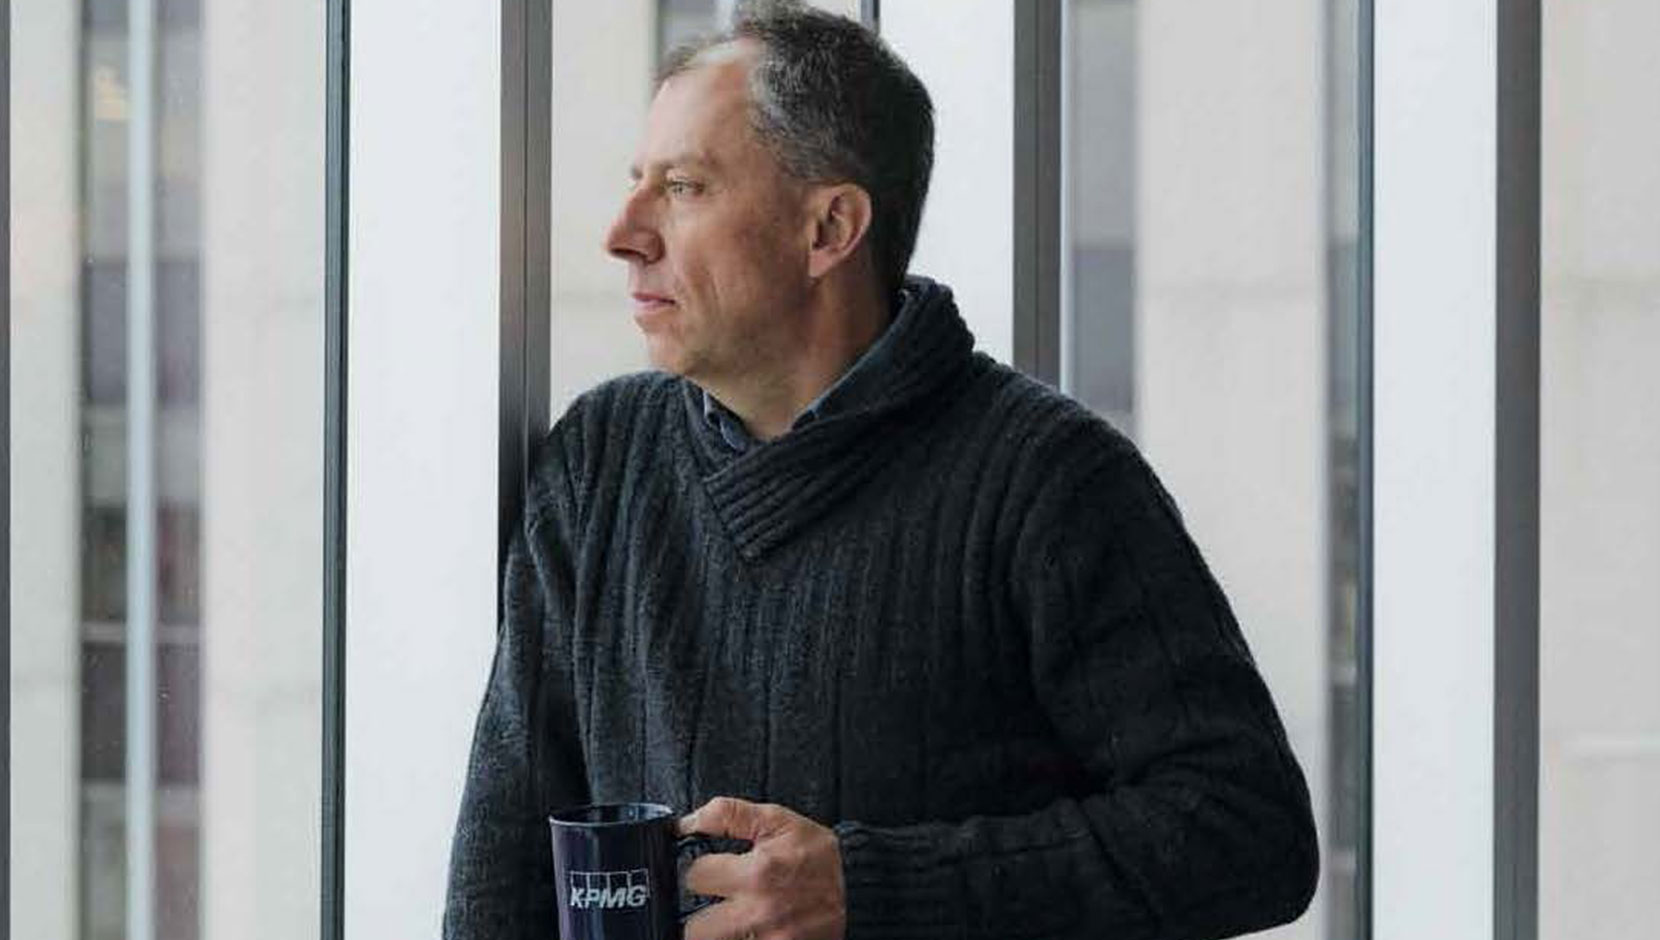 Dennis Trottier stands against floor to ceiling windows in a KPMG office. He is wearing a dark sweater, gazing outside and holding a KPMG mug.